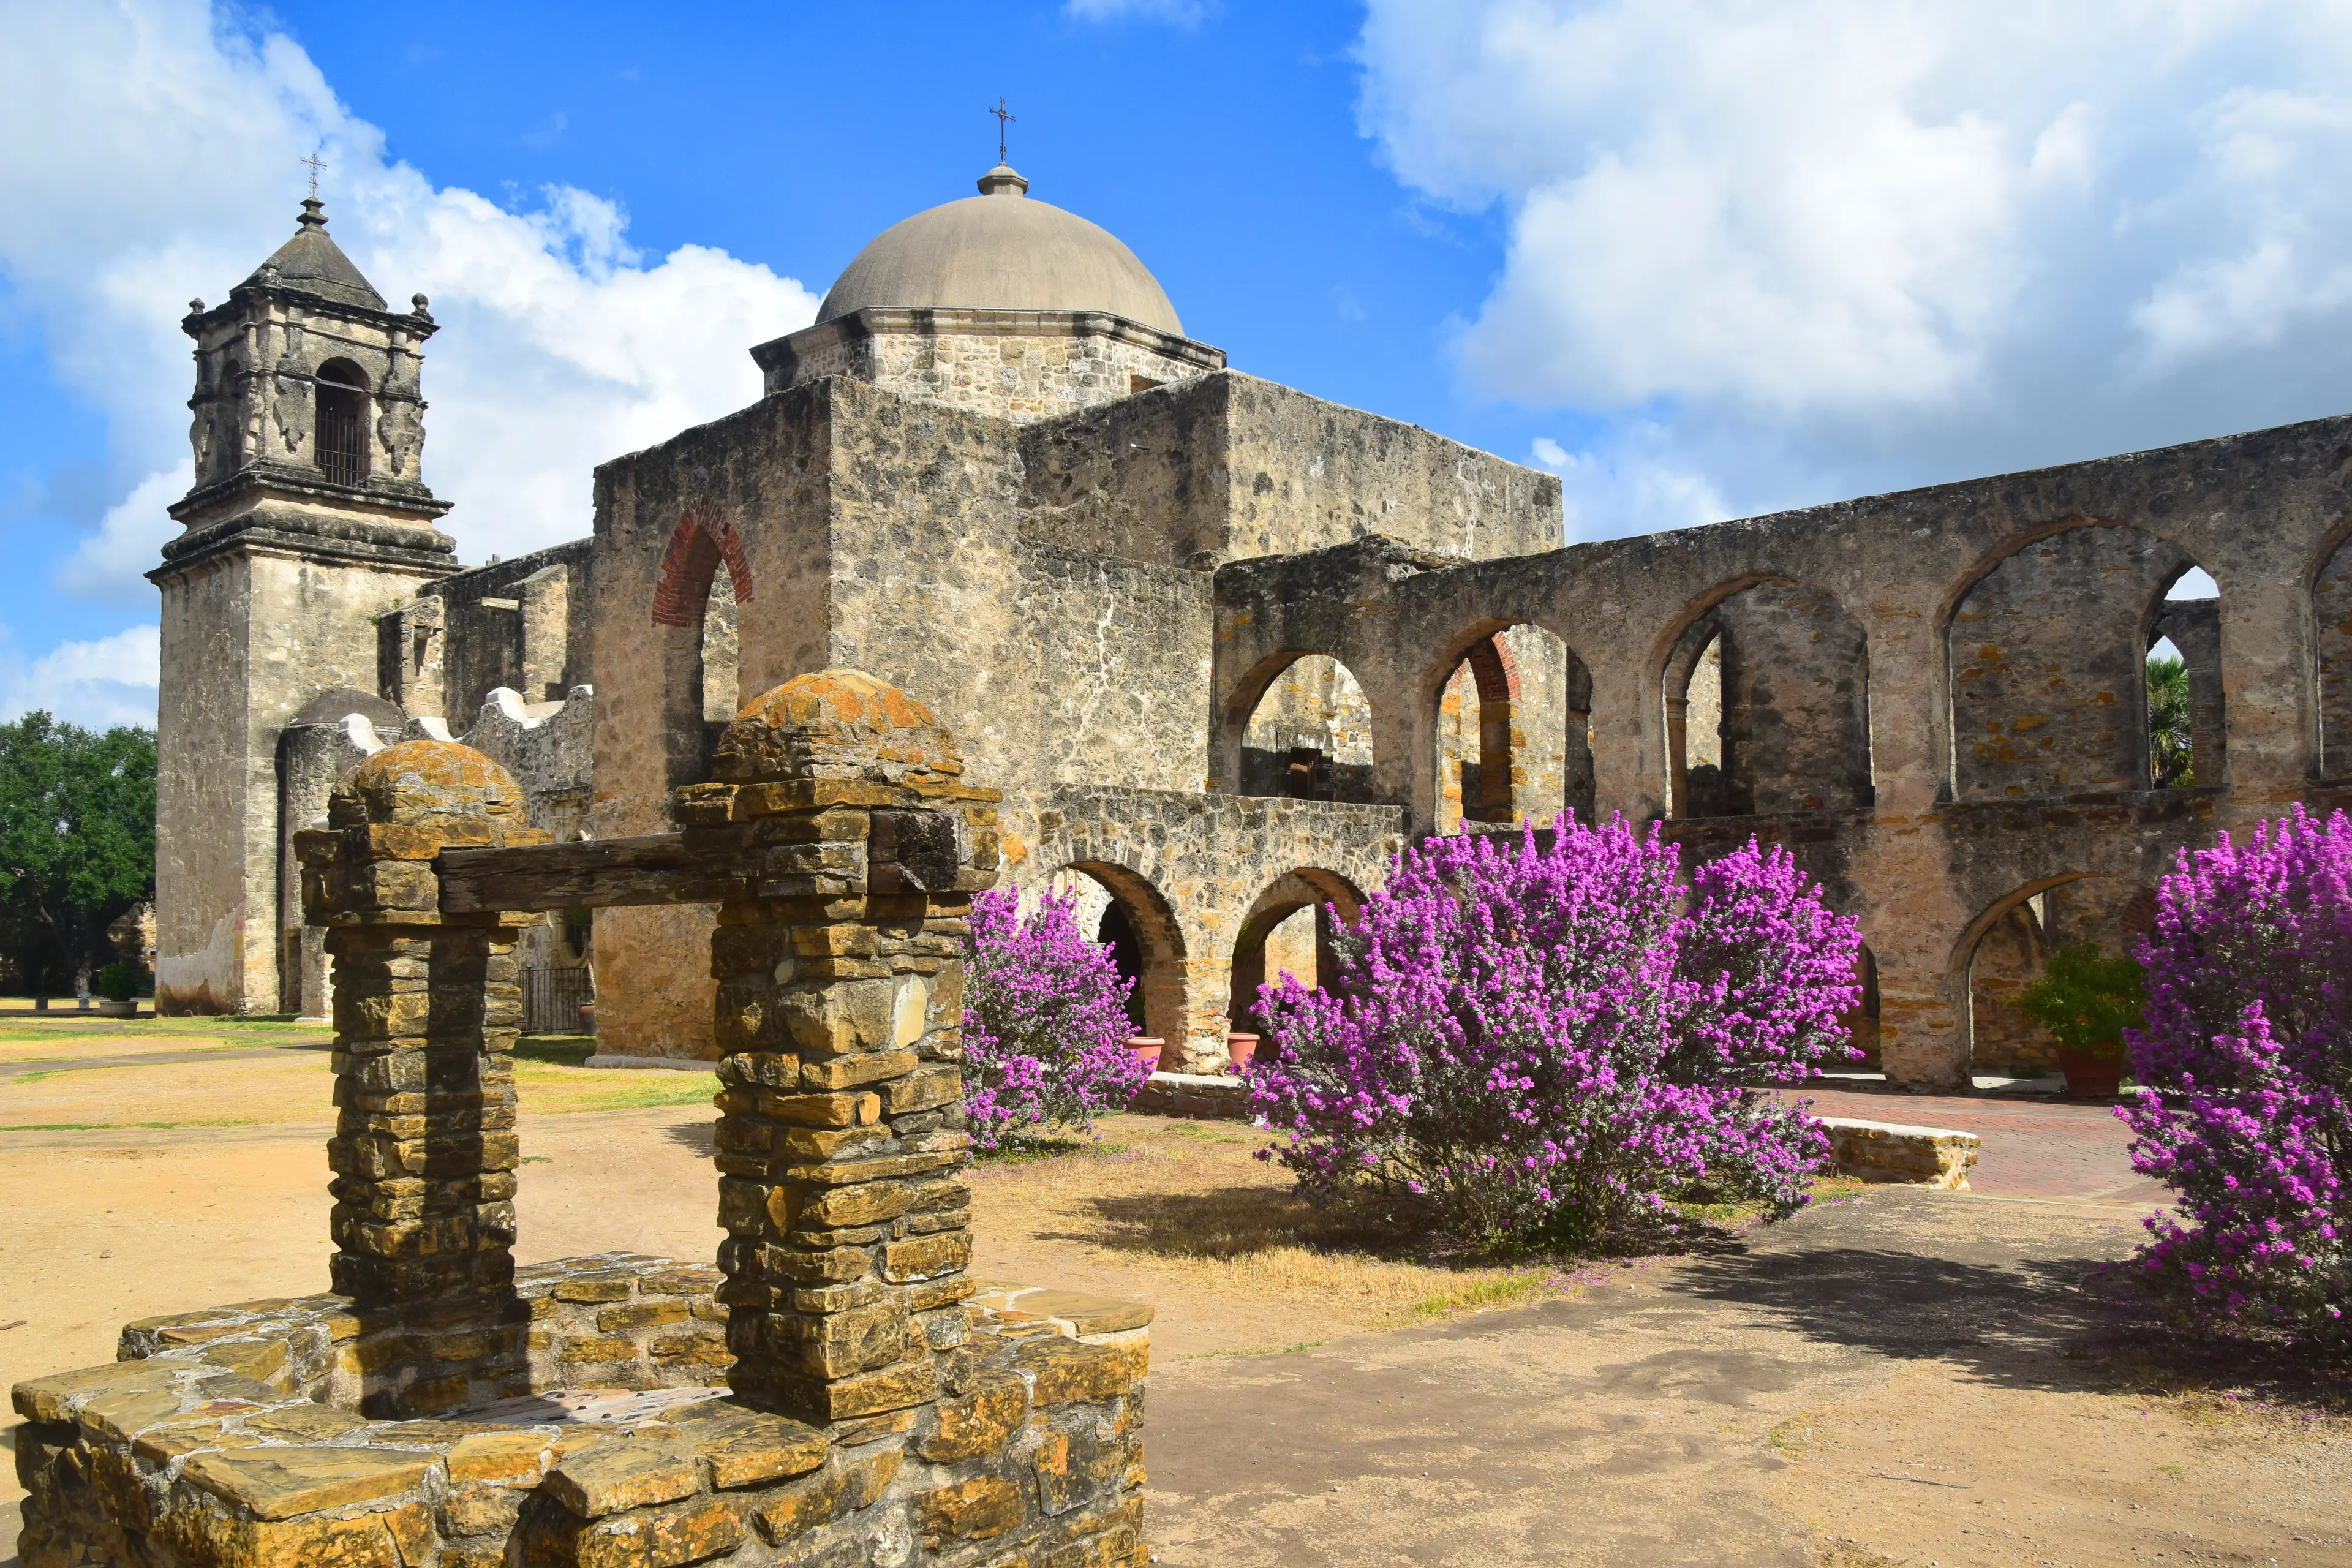 5-Day Outdoor Adventure and Sightseeing Journey in San Antonio with Friends